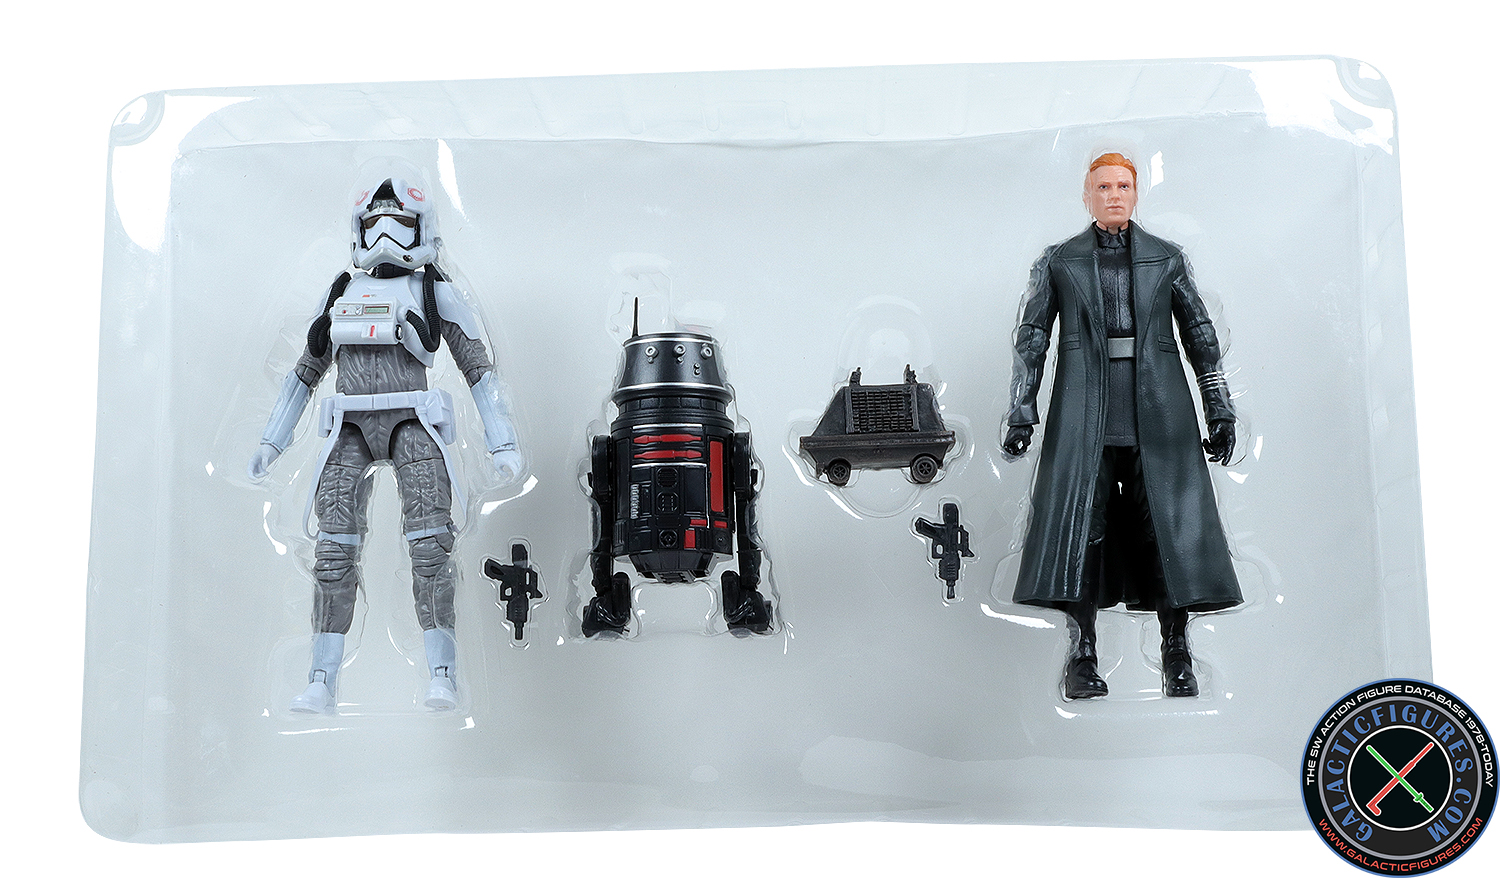 AT-AT Driver First Order 4-Pack